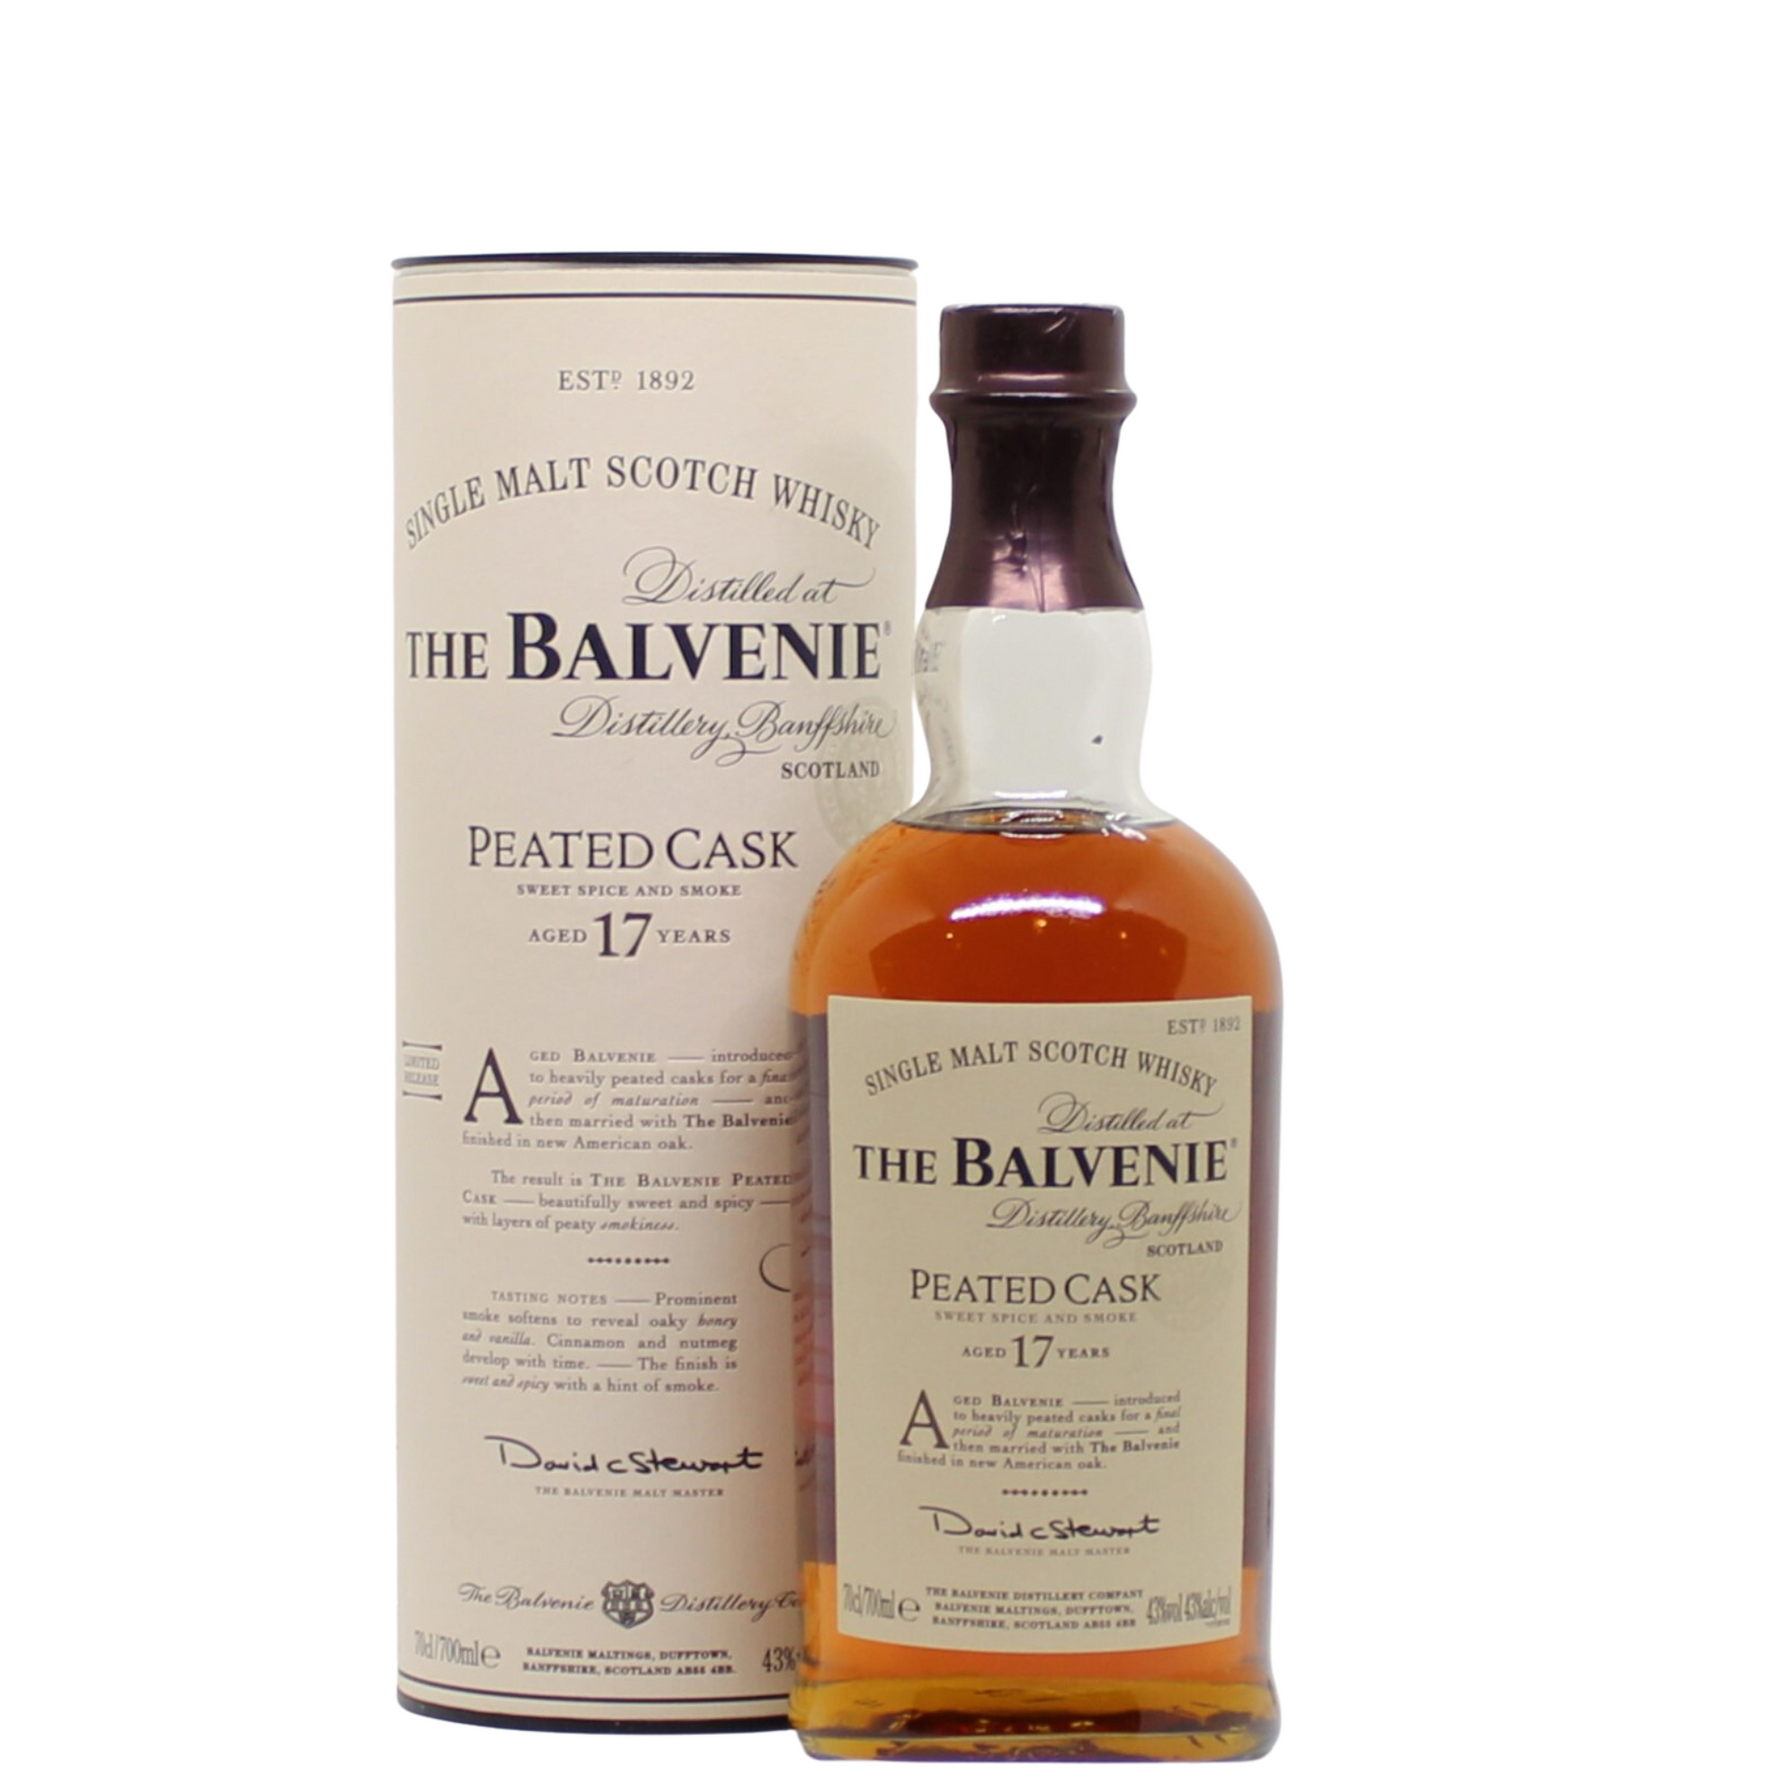 This 2010 release from the Balvenie Distillery is quite different than a usual peated whisky, having been finished in casks that previously held a peated whisky. As opposed to being a peated whisky, this is a Peated Cask Finish being a vatting of whisky that has been matured in Peated Casks & New American Oak. While the smoke is present, it is not as direct as in a peated whisky itself.